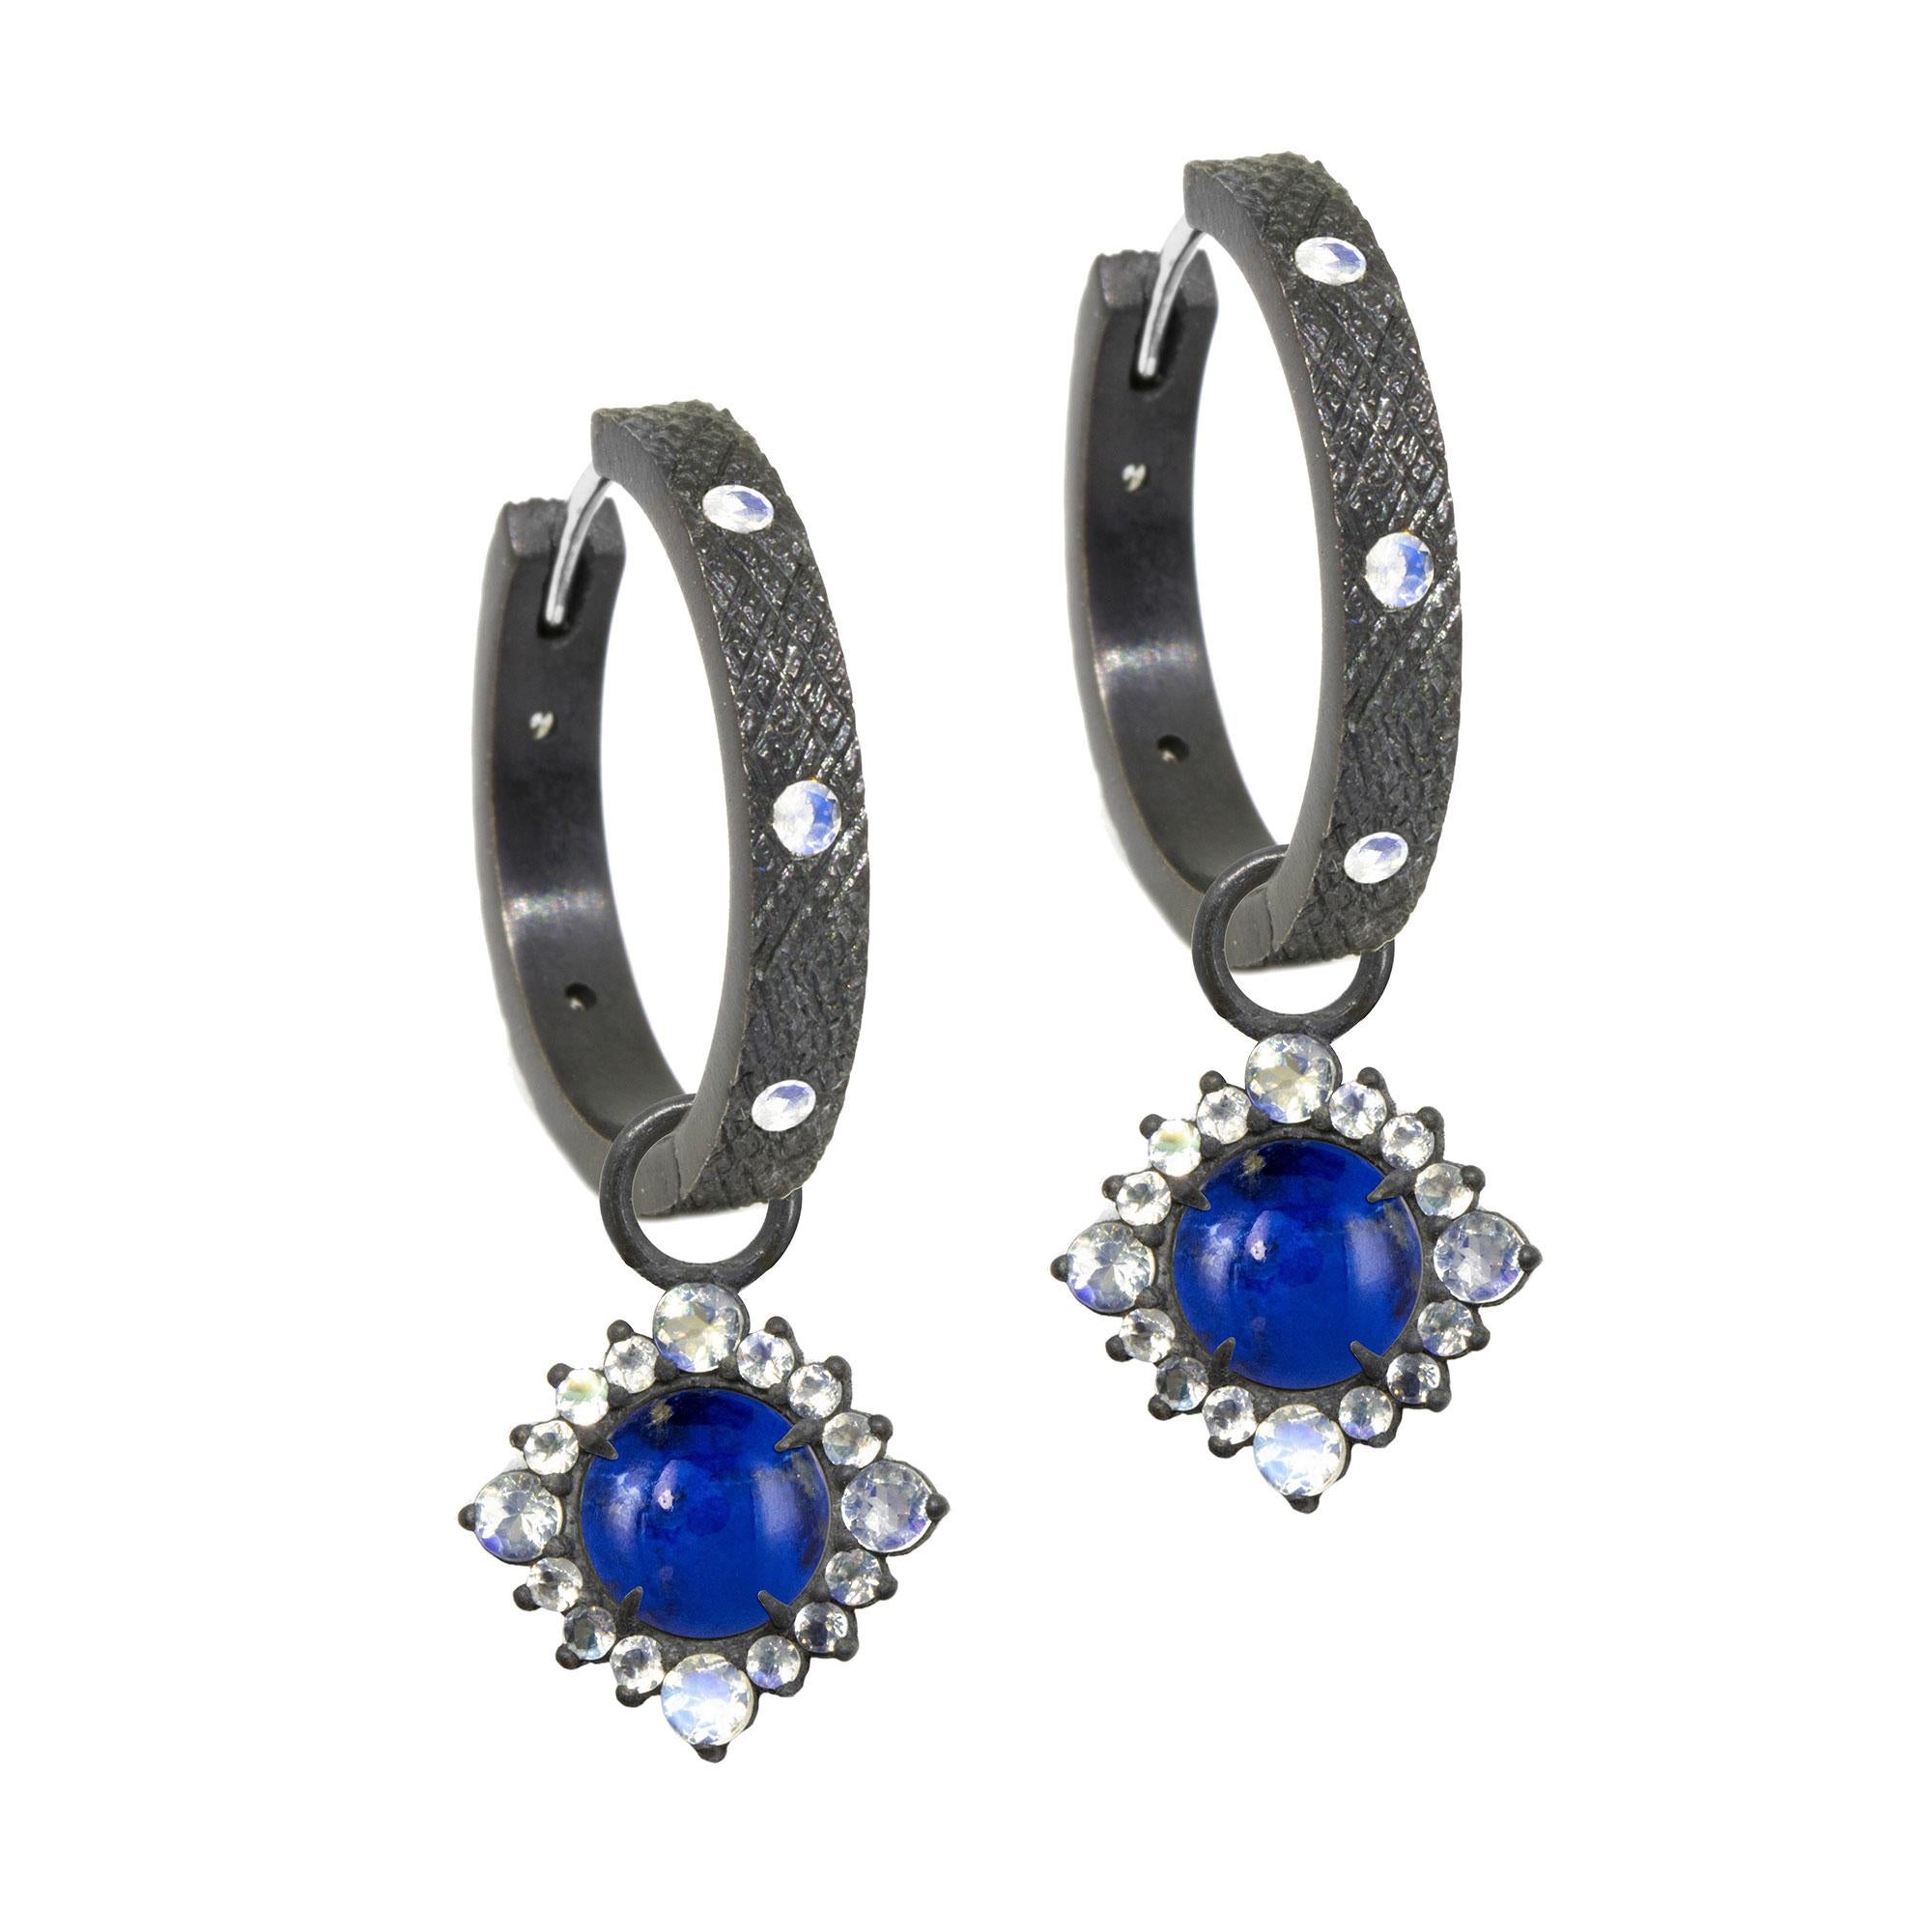  Our moonstone-accented Grace Silver Earring Charms are rimmed in black oxidized silver, with a vivid lapis gemstone at the center. Pair them with an hoop, mix them with any style, the Grace Silver Earring Charms made a great addition. 

Nina Nguyen